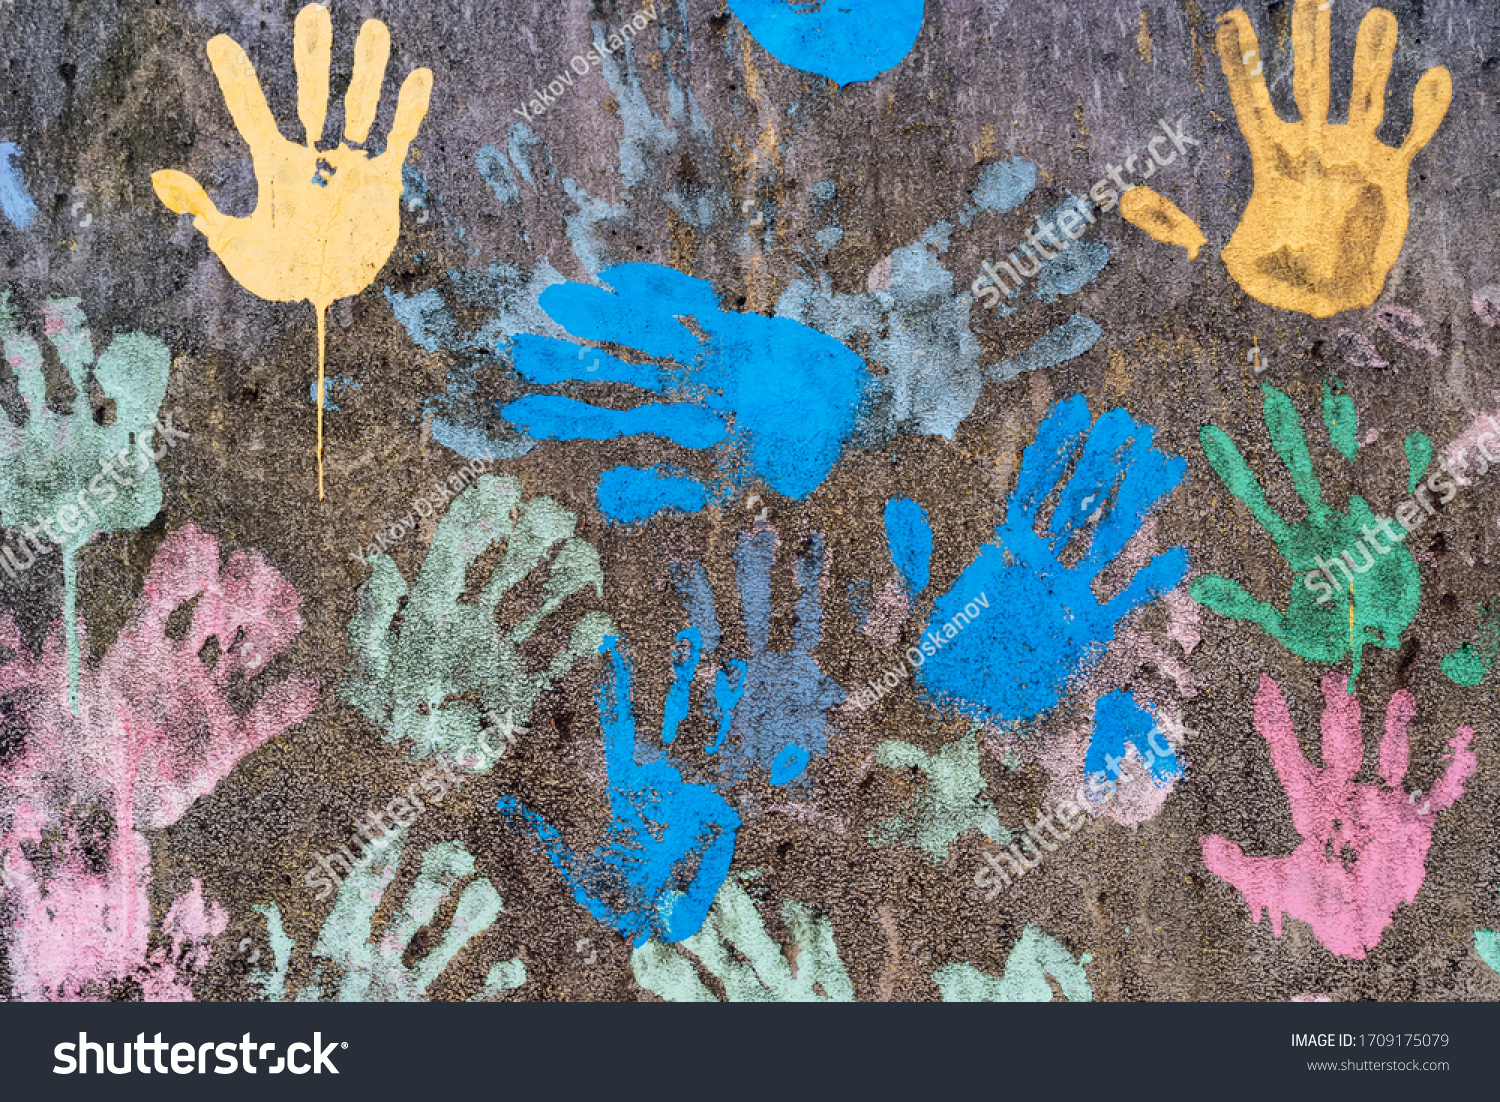 Dark background with colorful handprints symbolising interracial friendship #1709175079